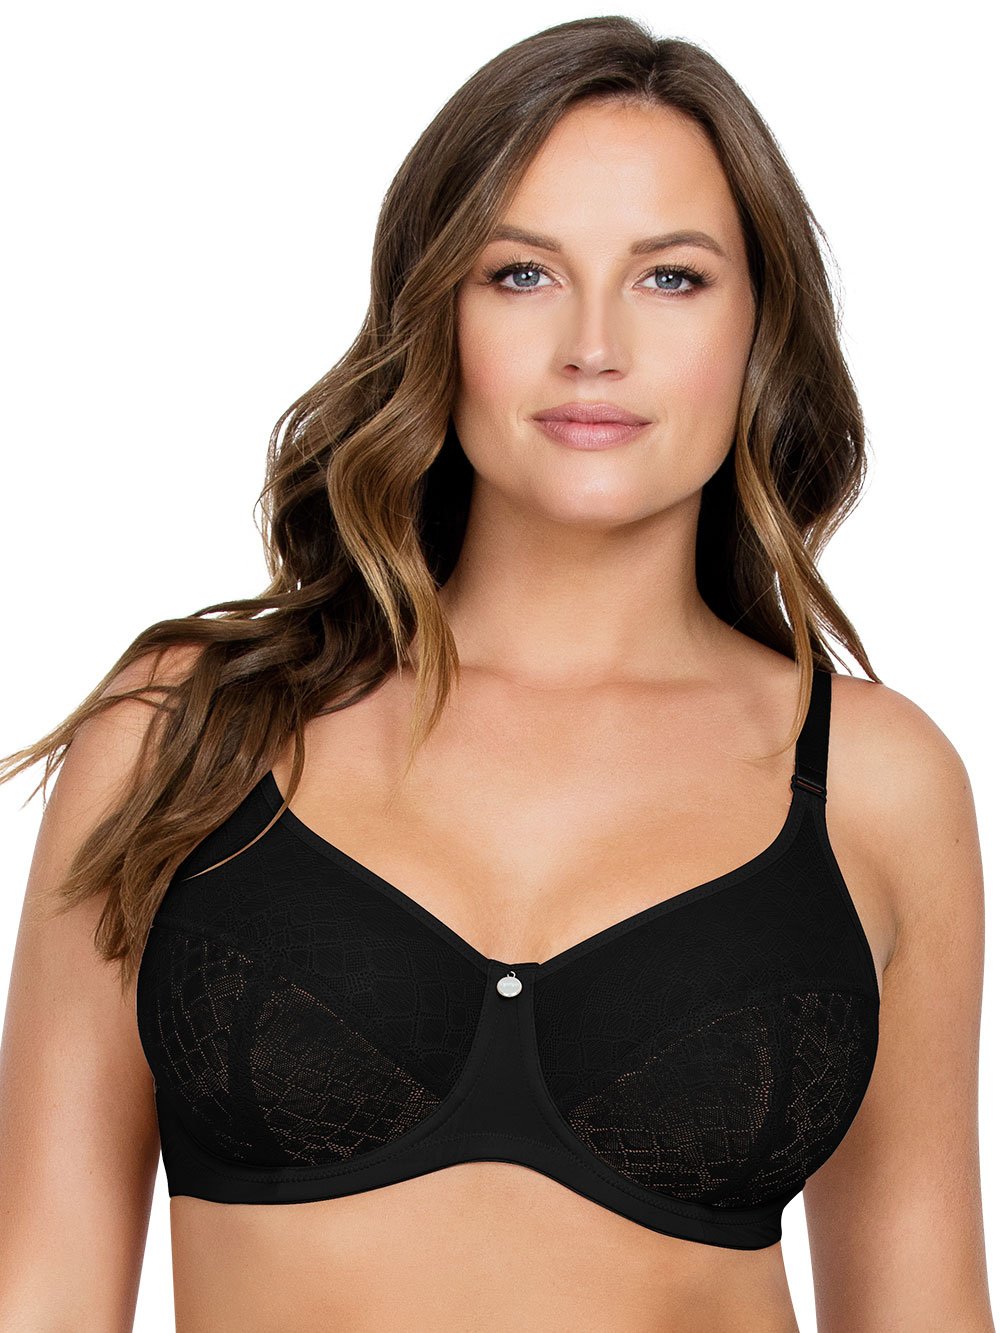 D Cup Bra: Bras for D Cup Boobs and Breast Size Tagged Panache Sculptresse  Bras - HauteFlair